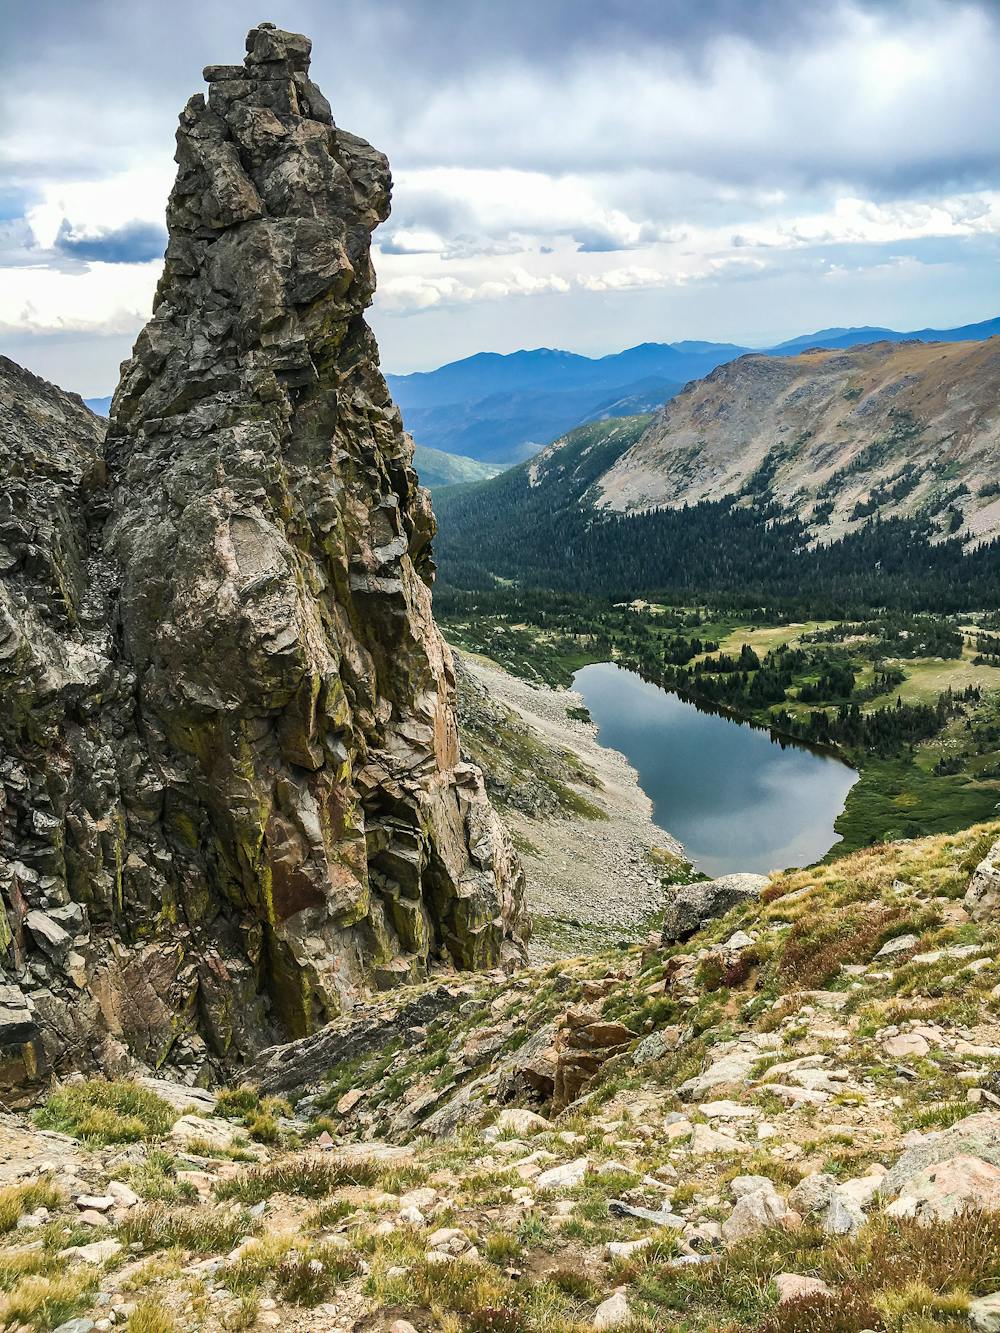 The Devils Thumb and lake below, seen from near the Continental Divide